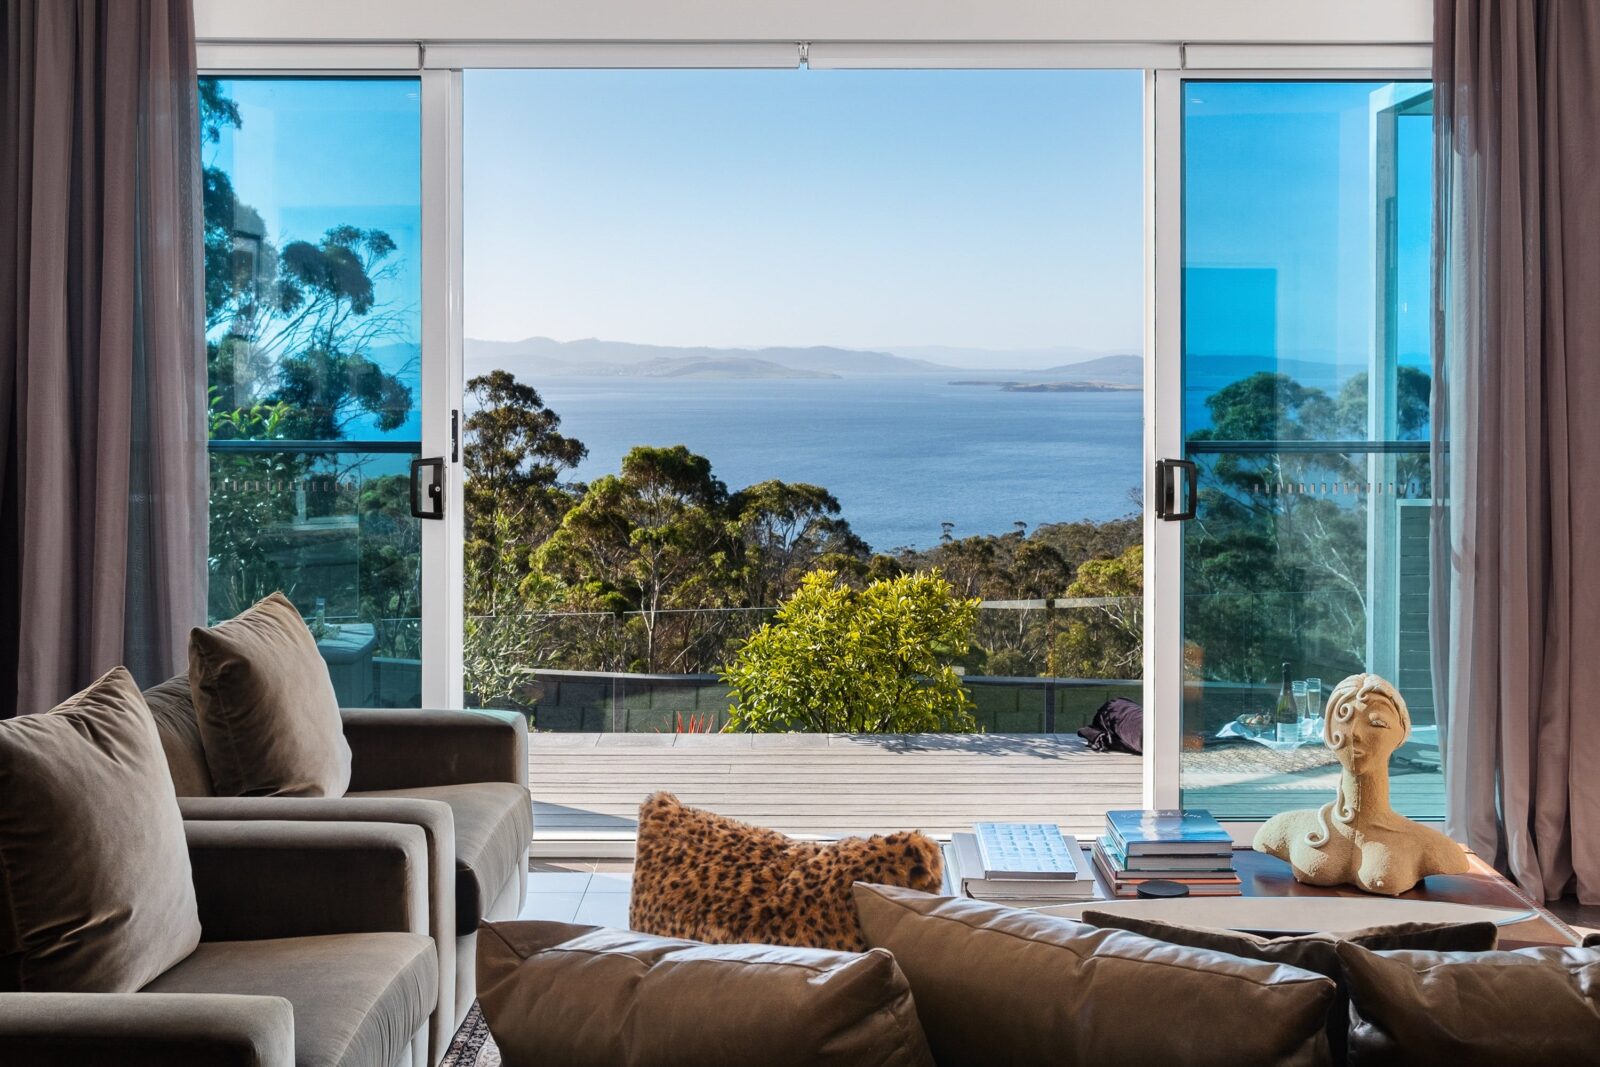 Prepare to be captivated by the water views